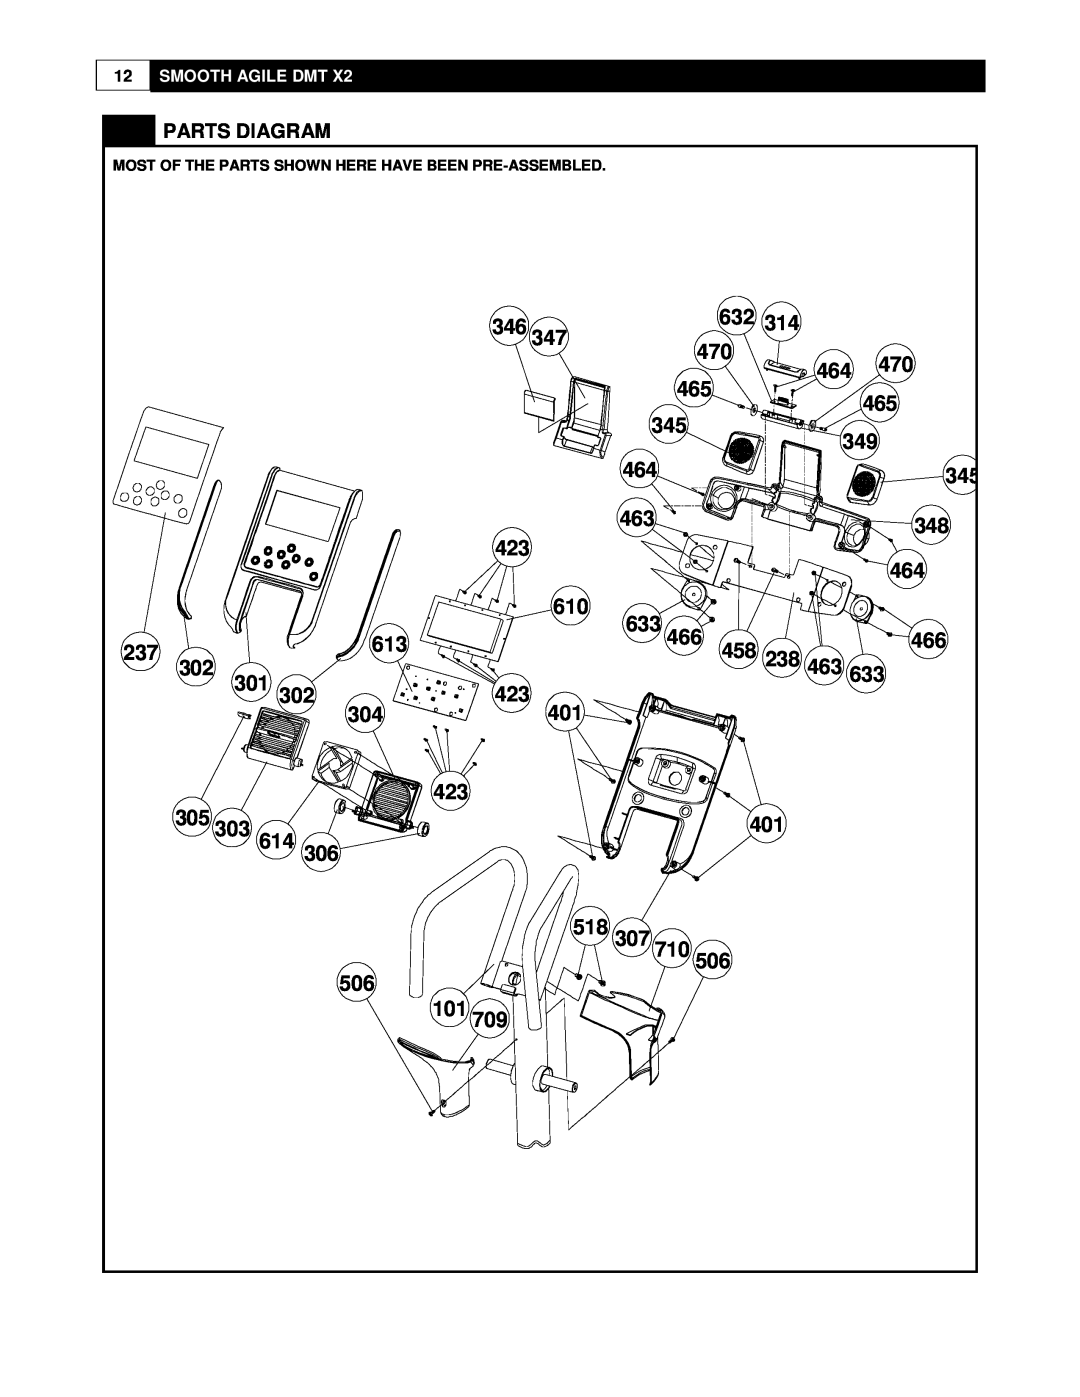 Smooth Fitness DMT X2 user manual Parts Diagram, Most Of The Parts Shown Here Have Been Pre-Assembled 